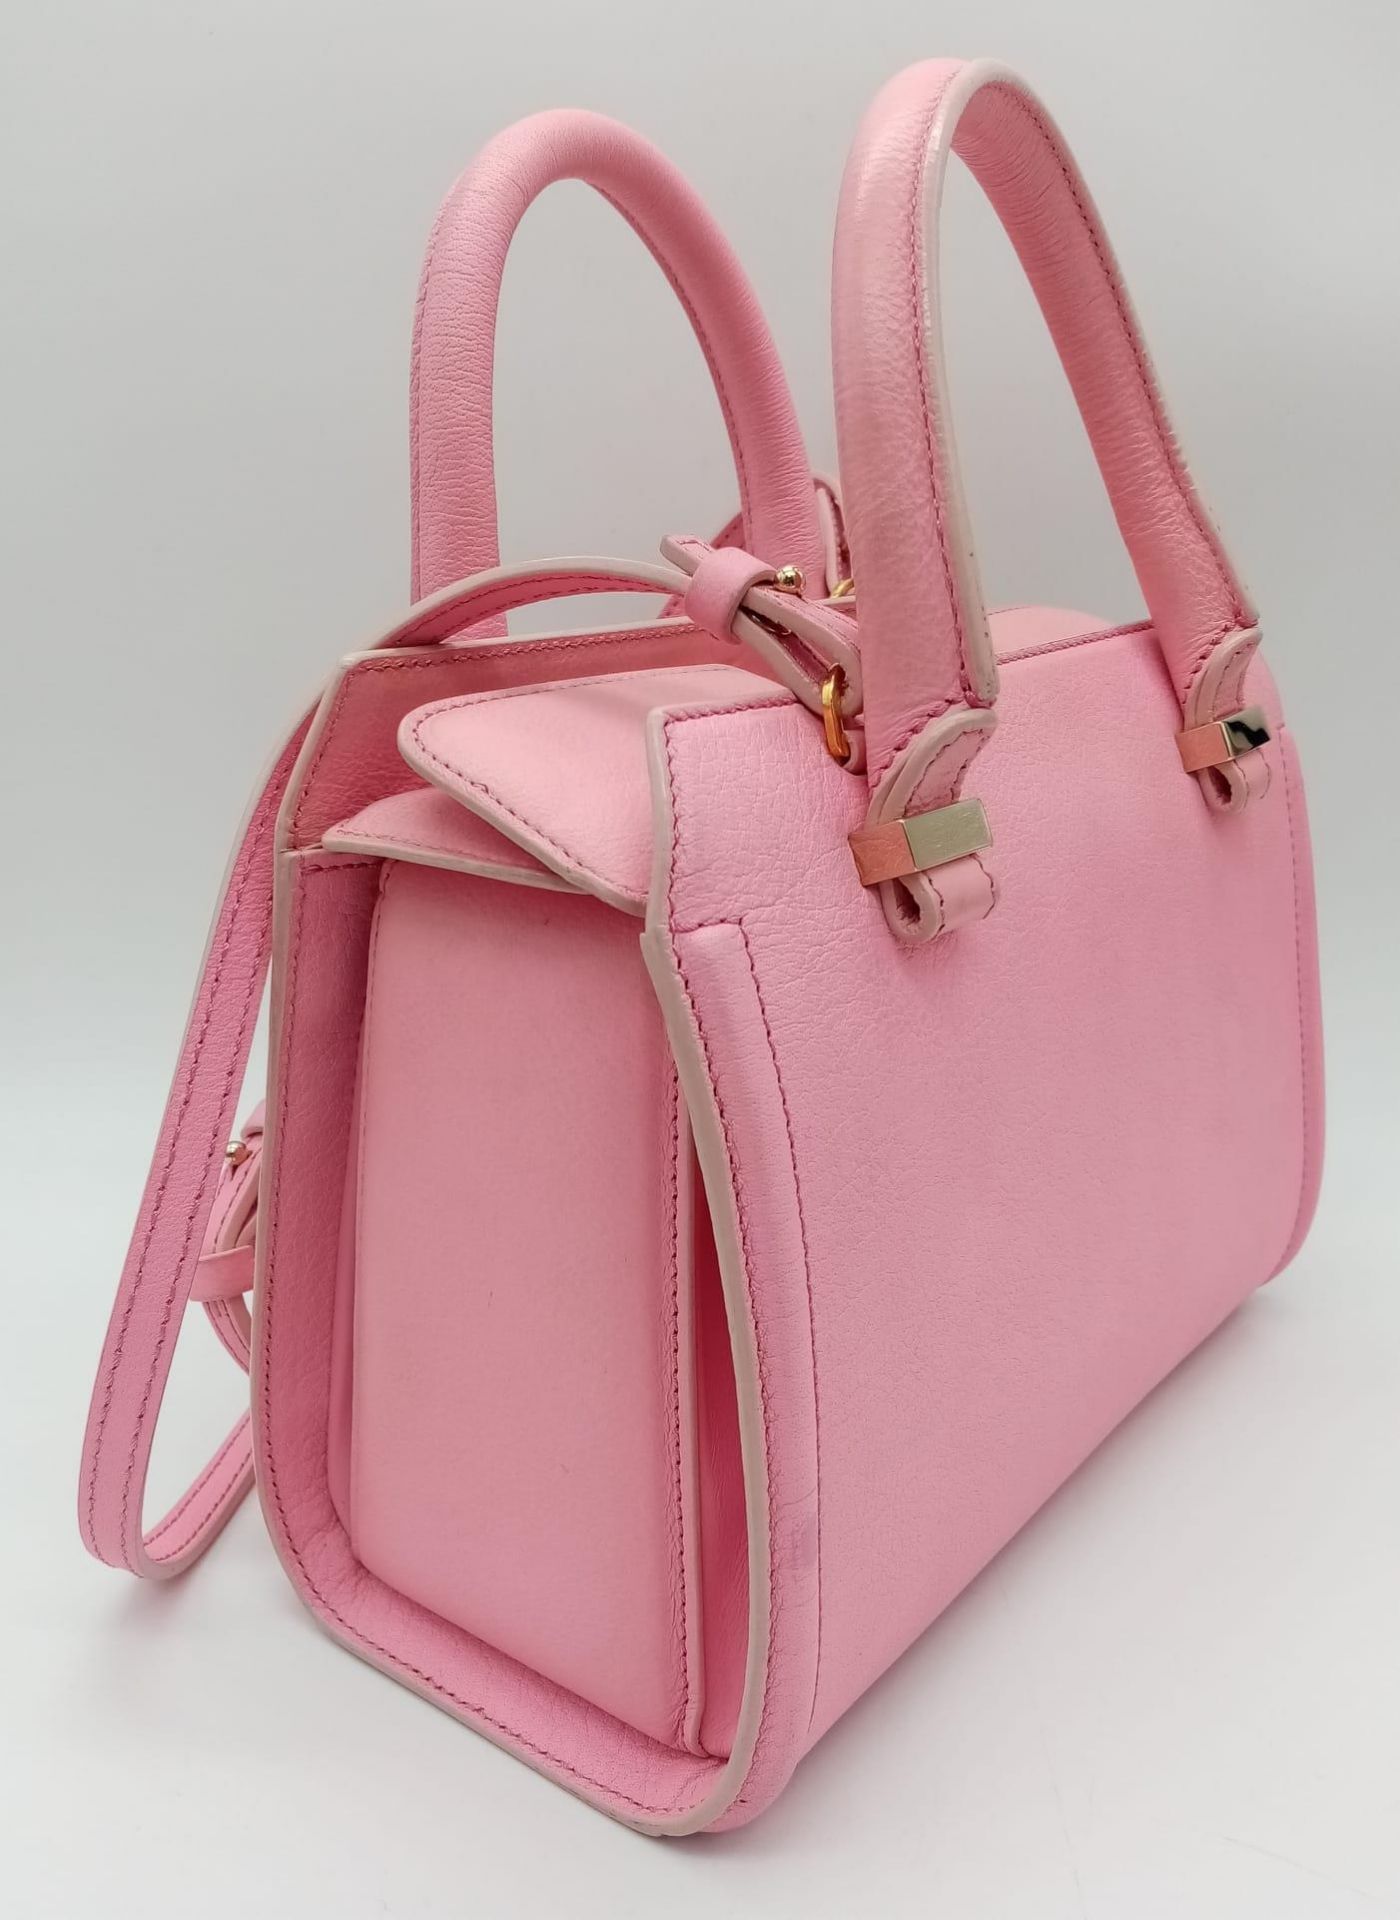 A Victoria Beckham two toned candy pink textured leather mini bag, patent leather trim with gold - Image 2 of 8